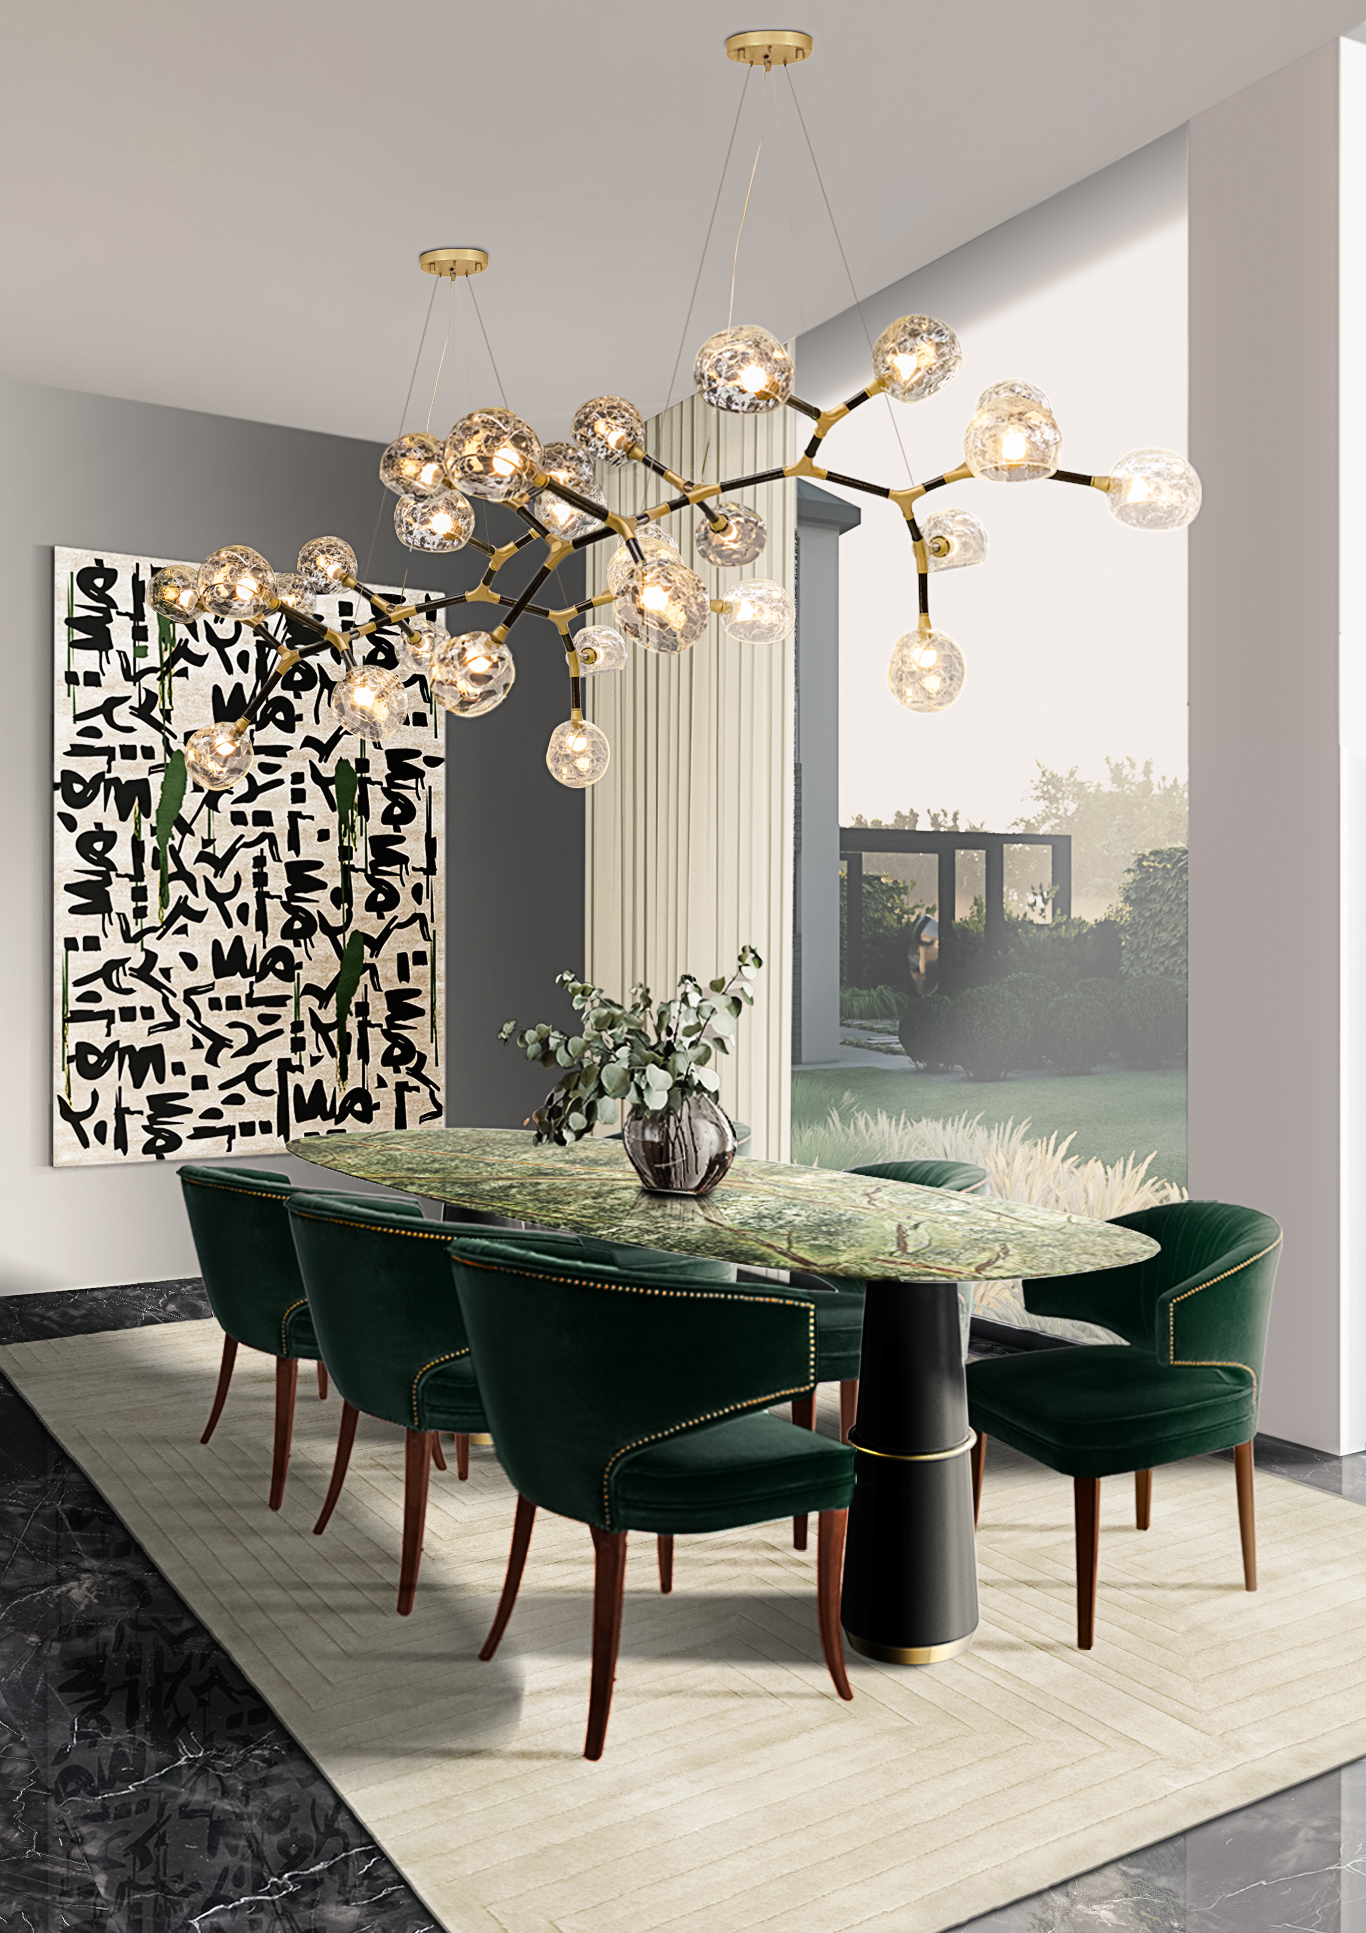 Dining Room Inspiration Ideas To Boost Your Decor!